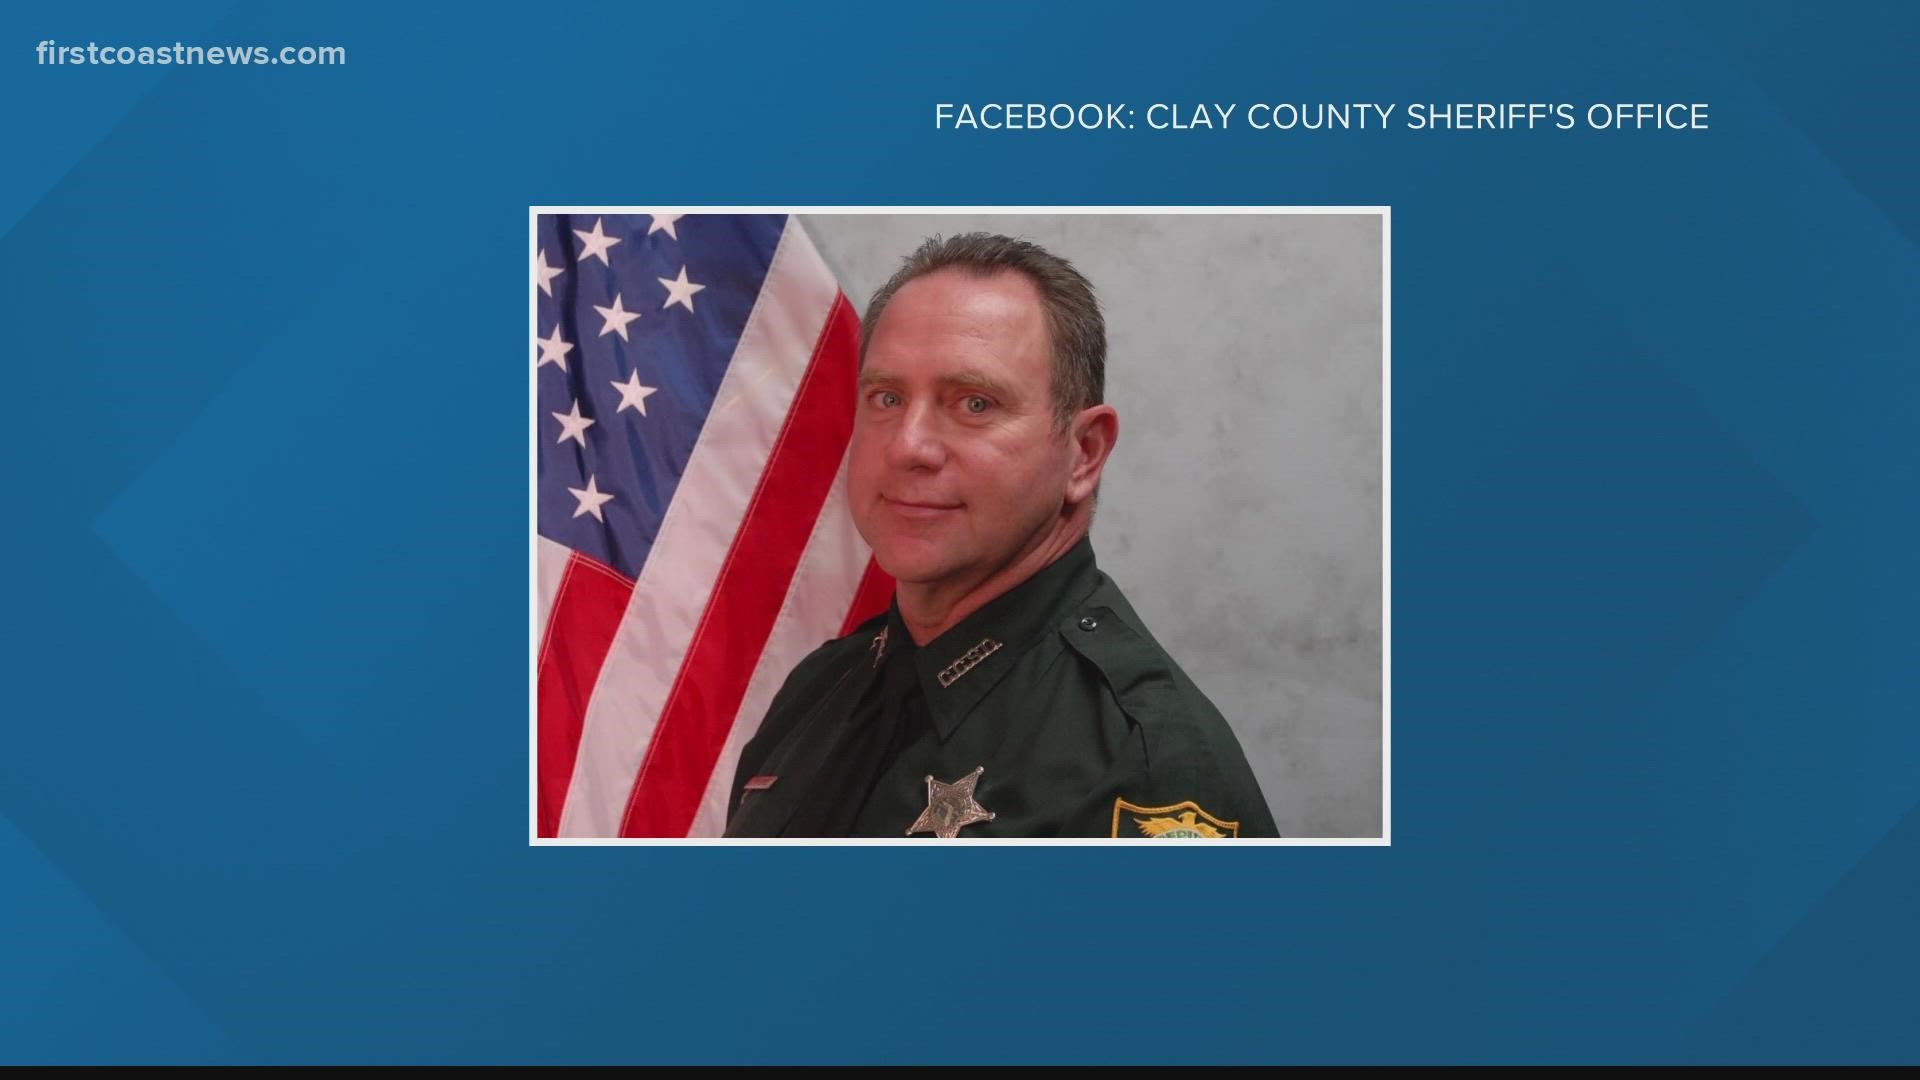 "Our thoughts and prayers are with his family, and we will remember his service to our county and our country always," the sheriff's office said in a Facebook post.